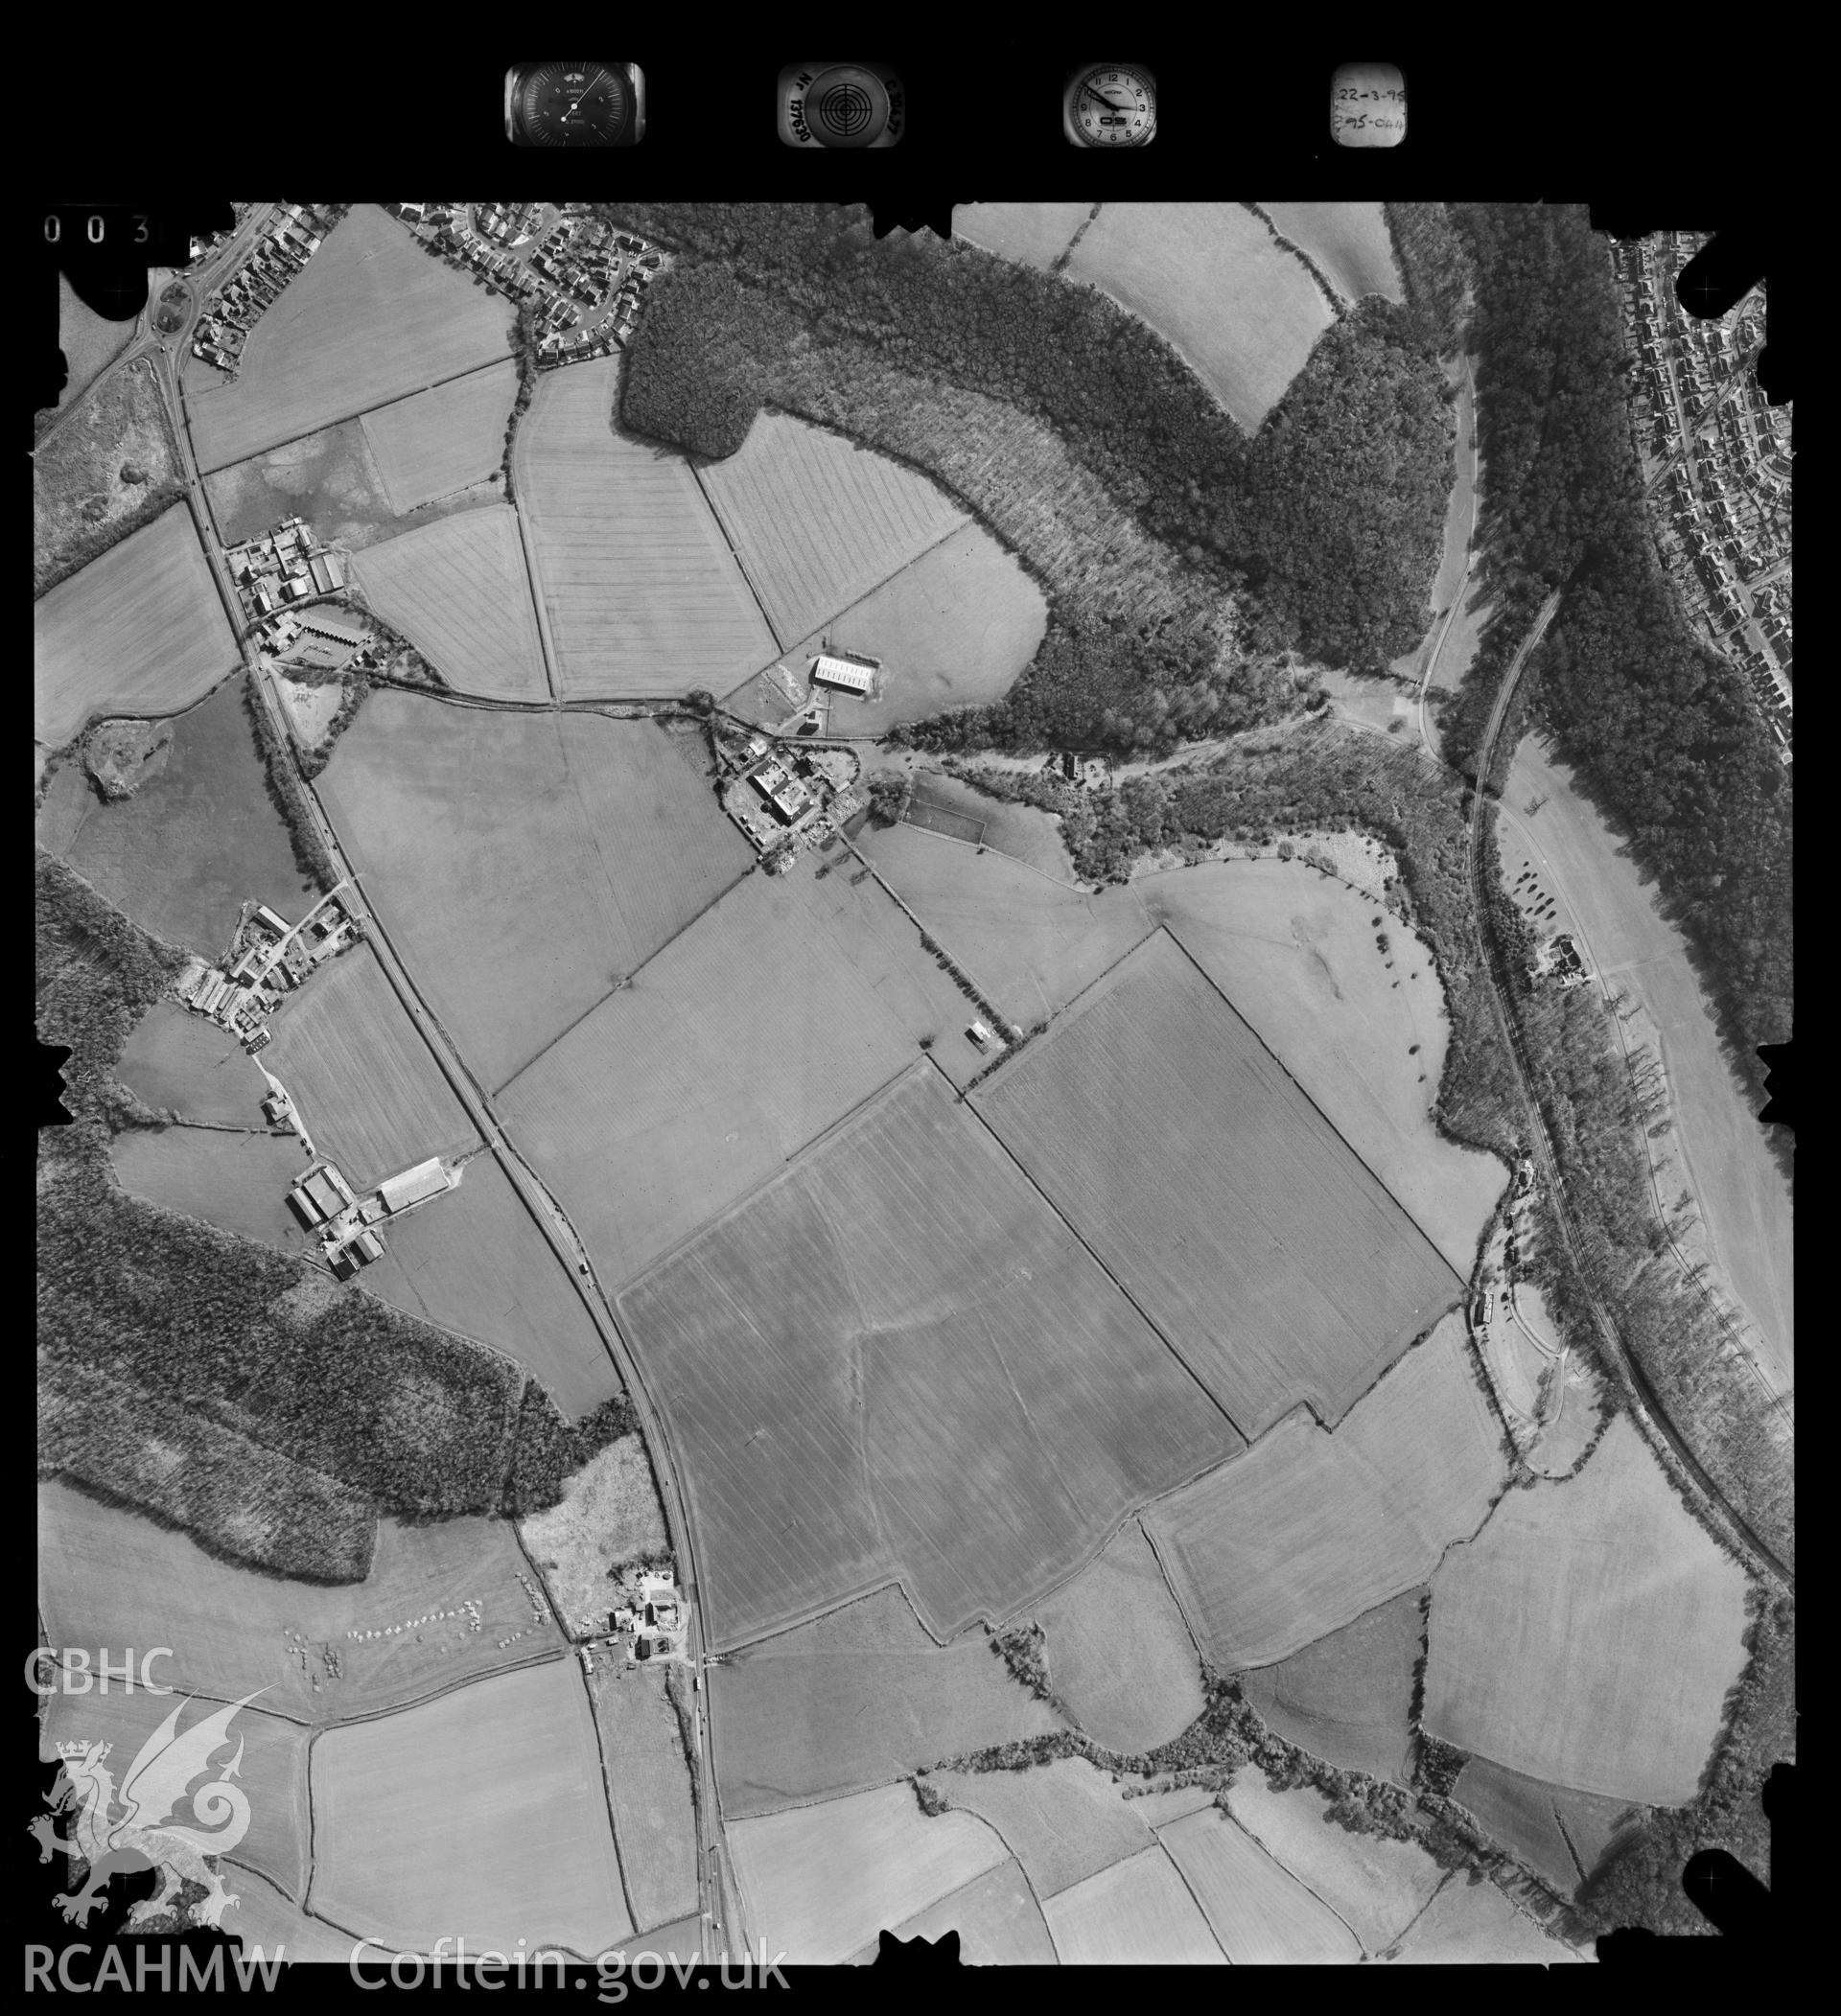 Digitized copy of an aerial photograph showing the St Athan area, taken by Ordnance Survey, 1995.